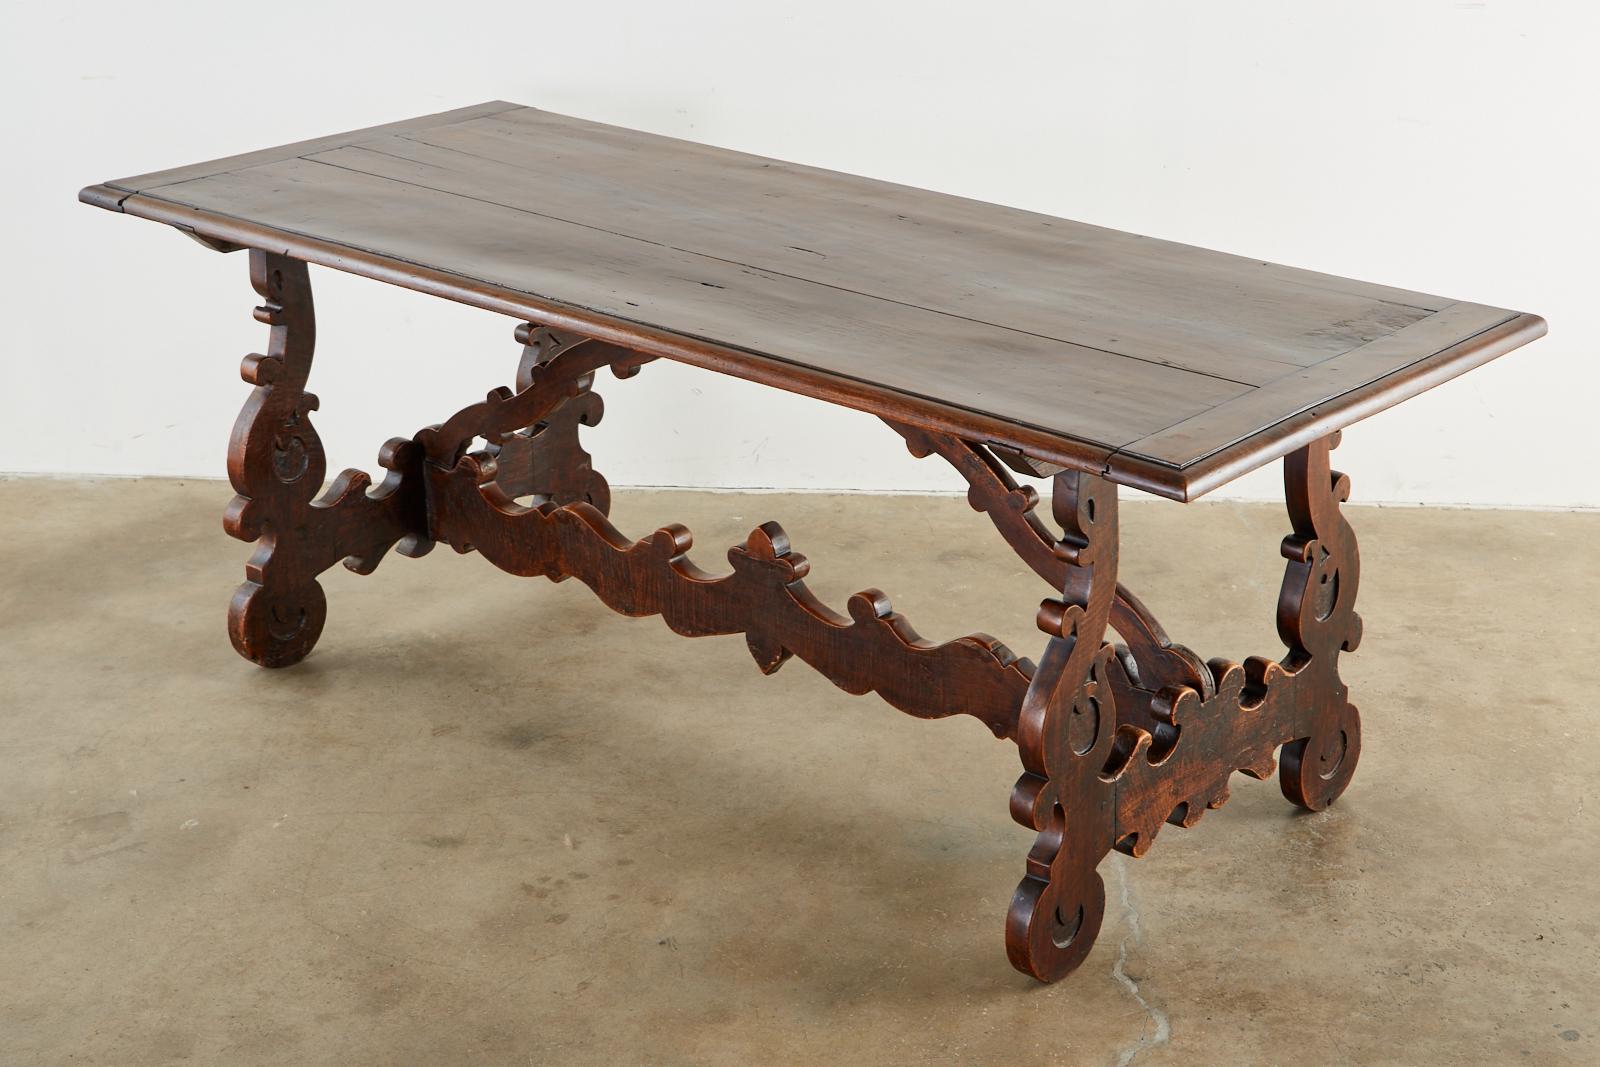 Magnificent 18th century Italian Baroque refectory table or dining table. Crafted from thick walnut planks with mortise and tenon joinery. The trestle style base is supported by carved lyre shaped legs on each end decorated with scroll work having